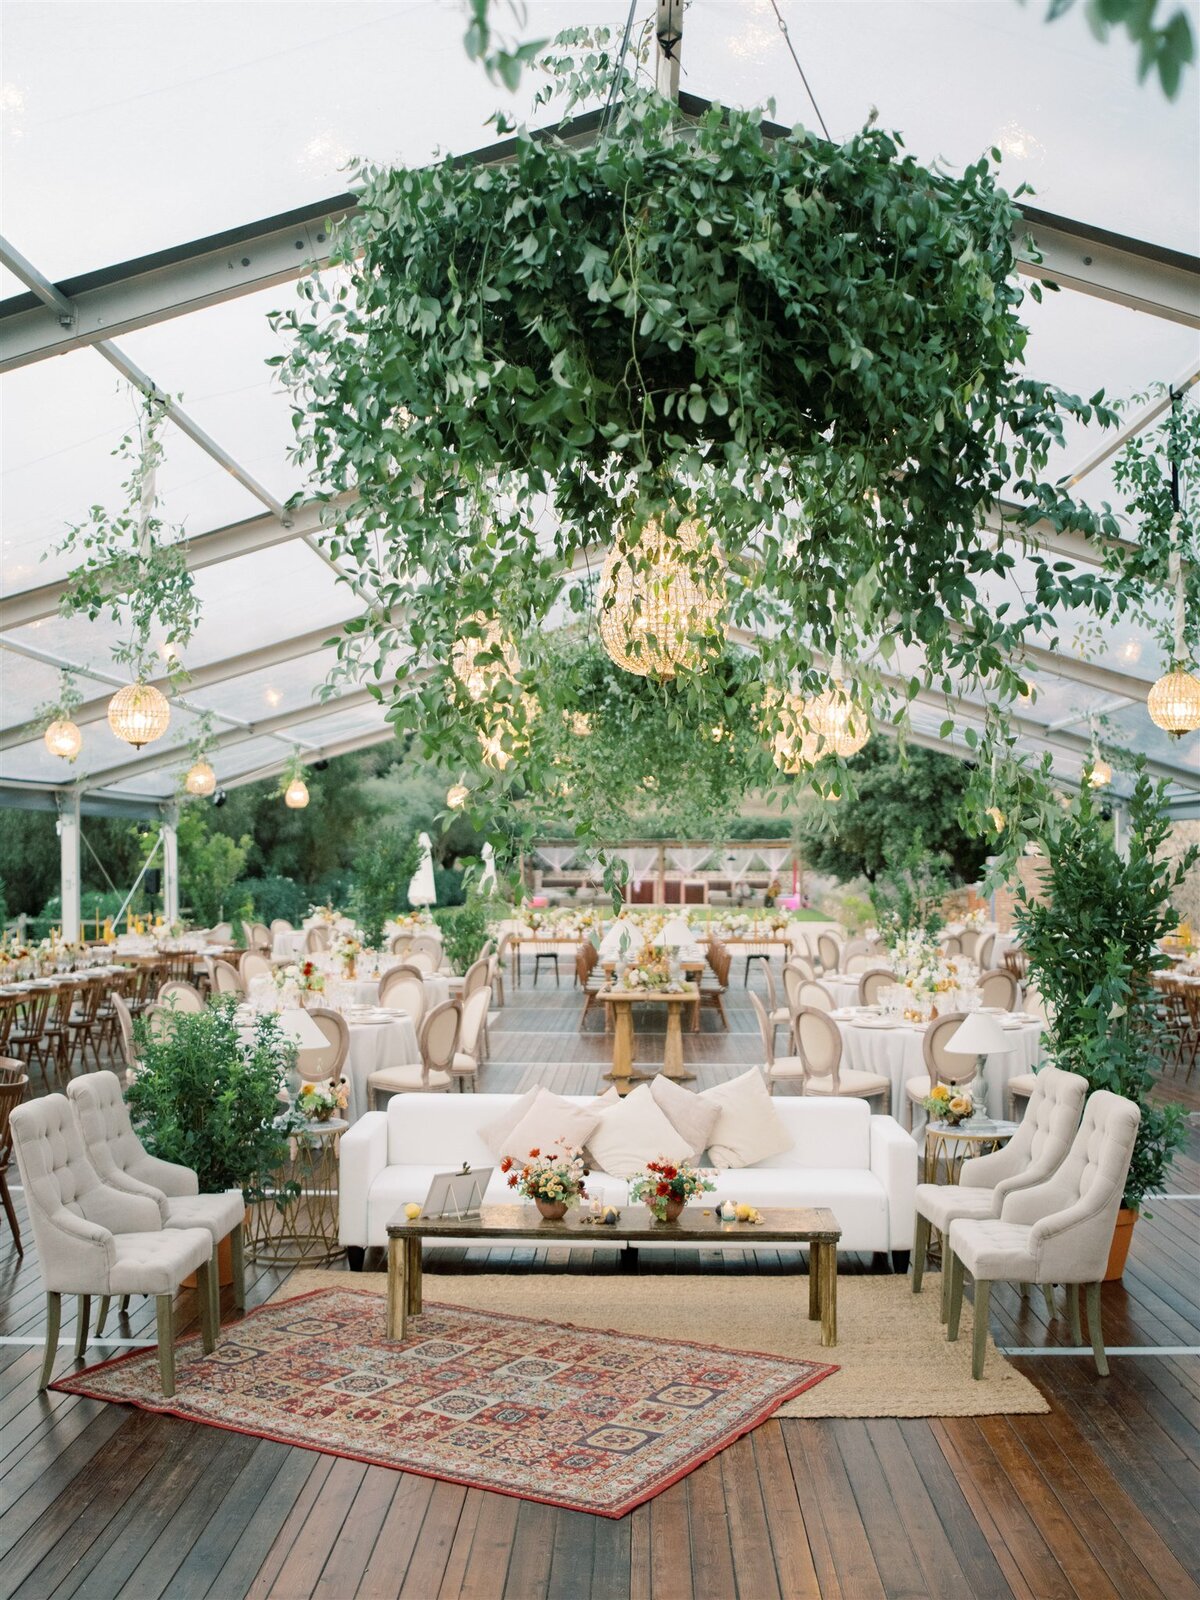 Garden inspiration structure and elegant tablescape